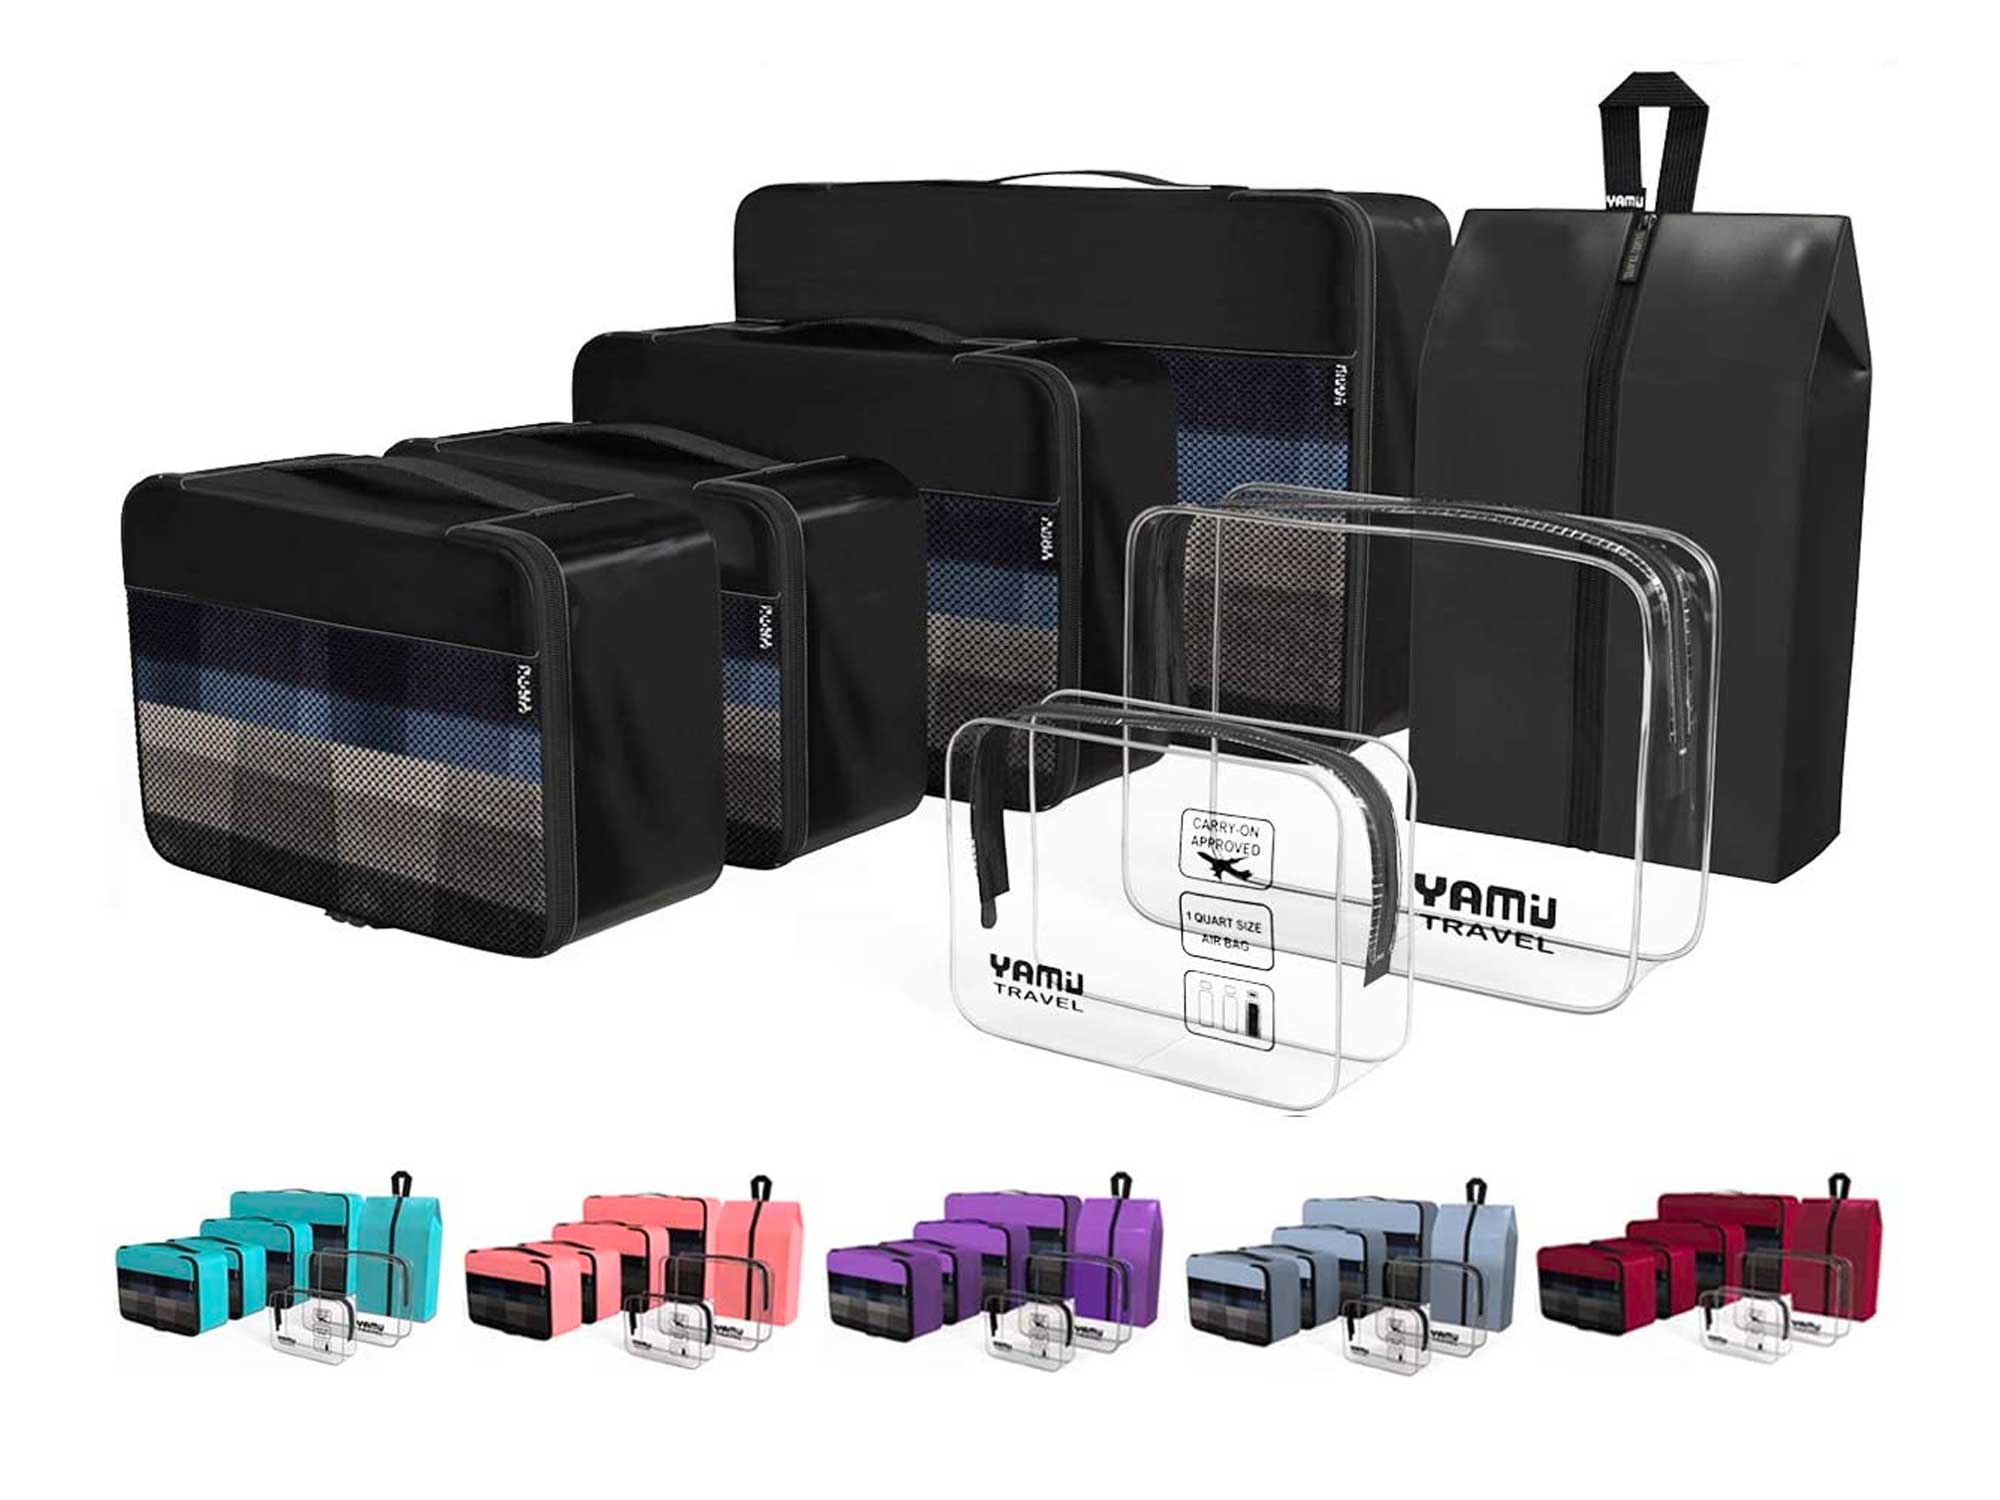 YAMIU Packing Cubes 7-Pcs Travel Organizer Accessories with Shoe Bag and 2 Toiletry Bags(Black)